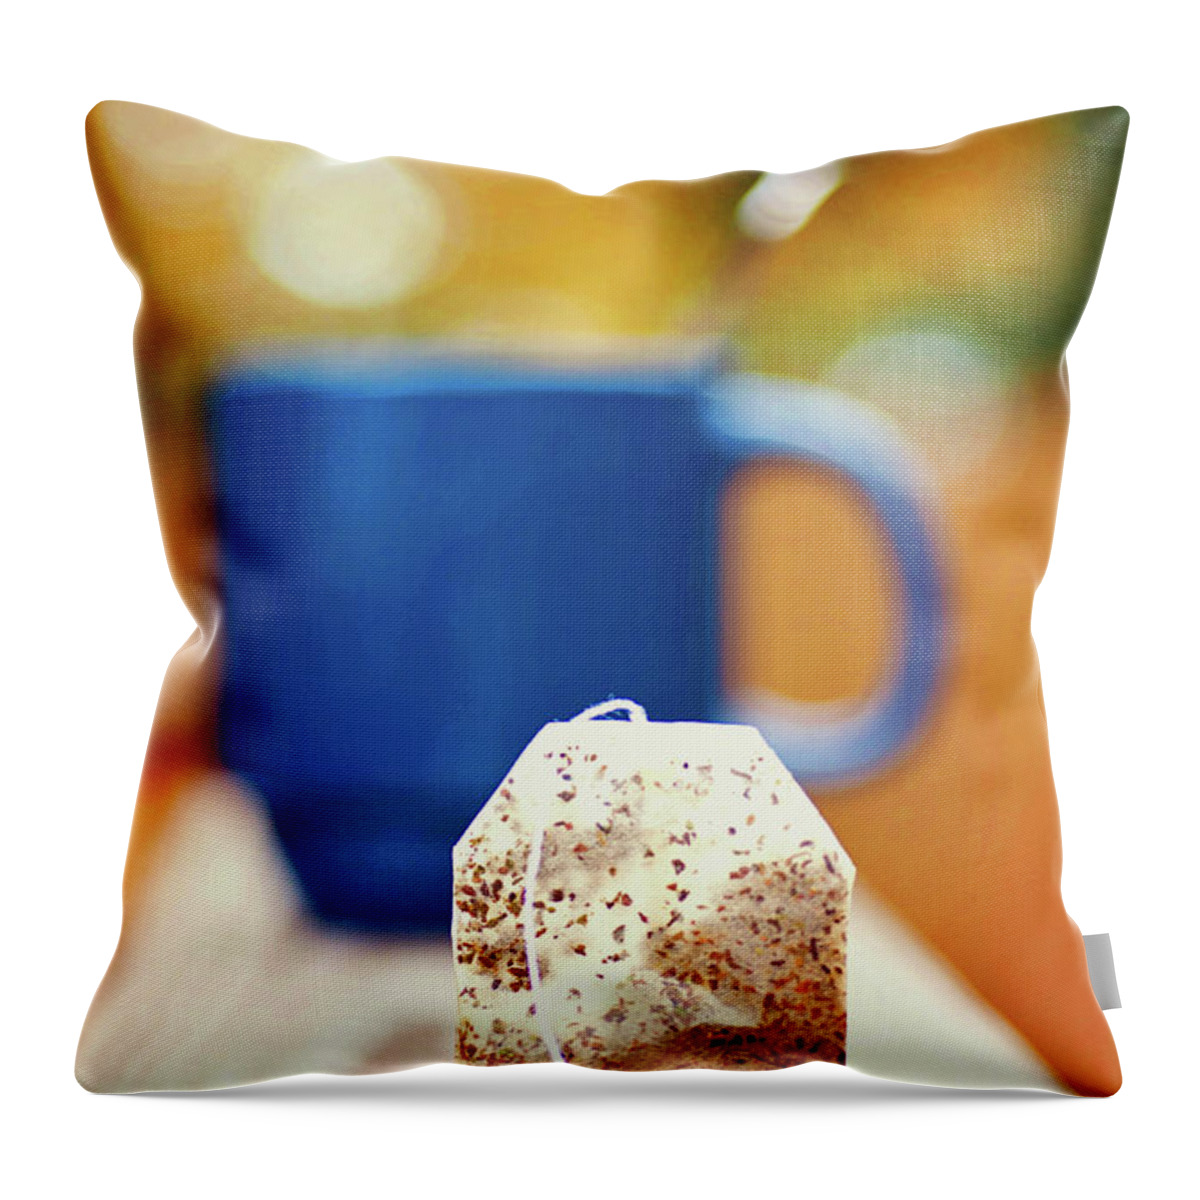 Spoon Throw Pillow featuring the photograph Tea Bag by Kristal O'neal